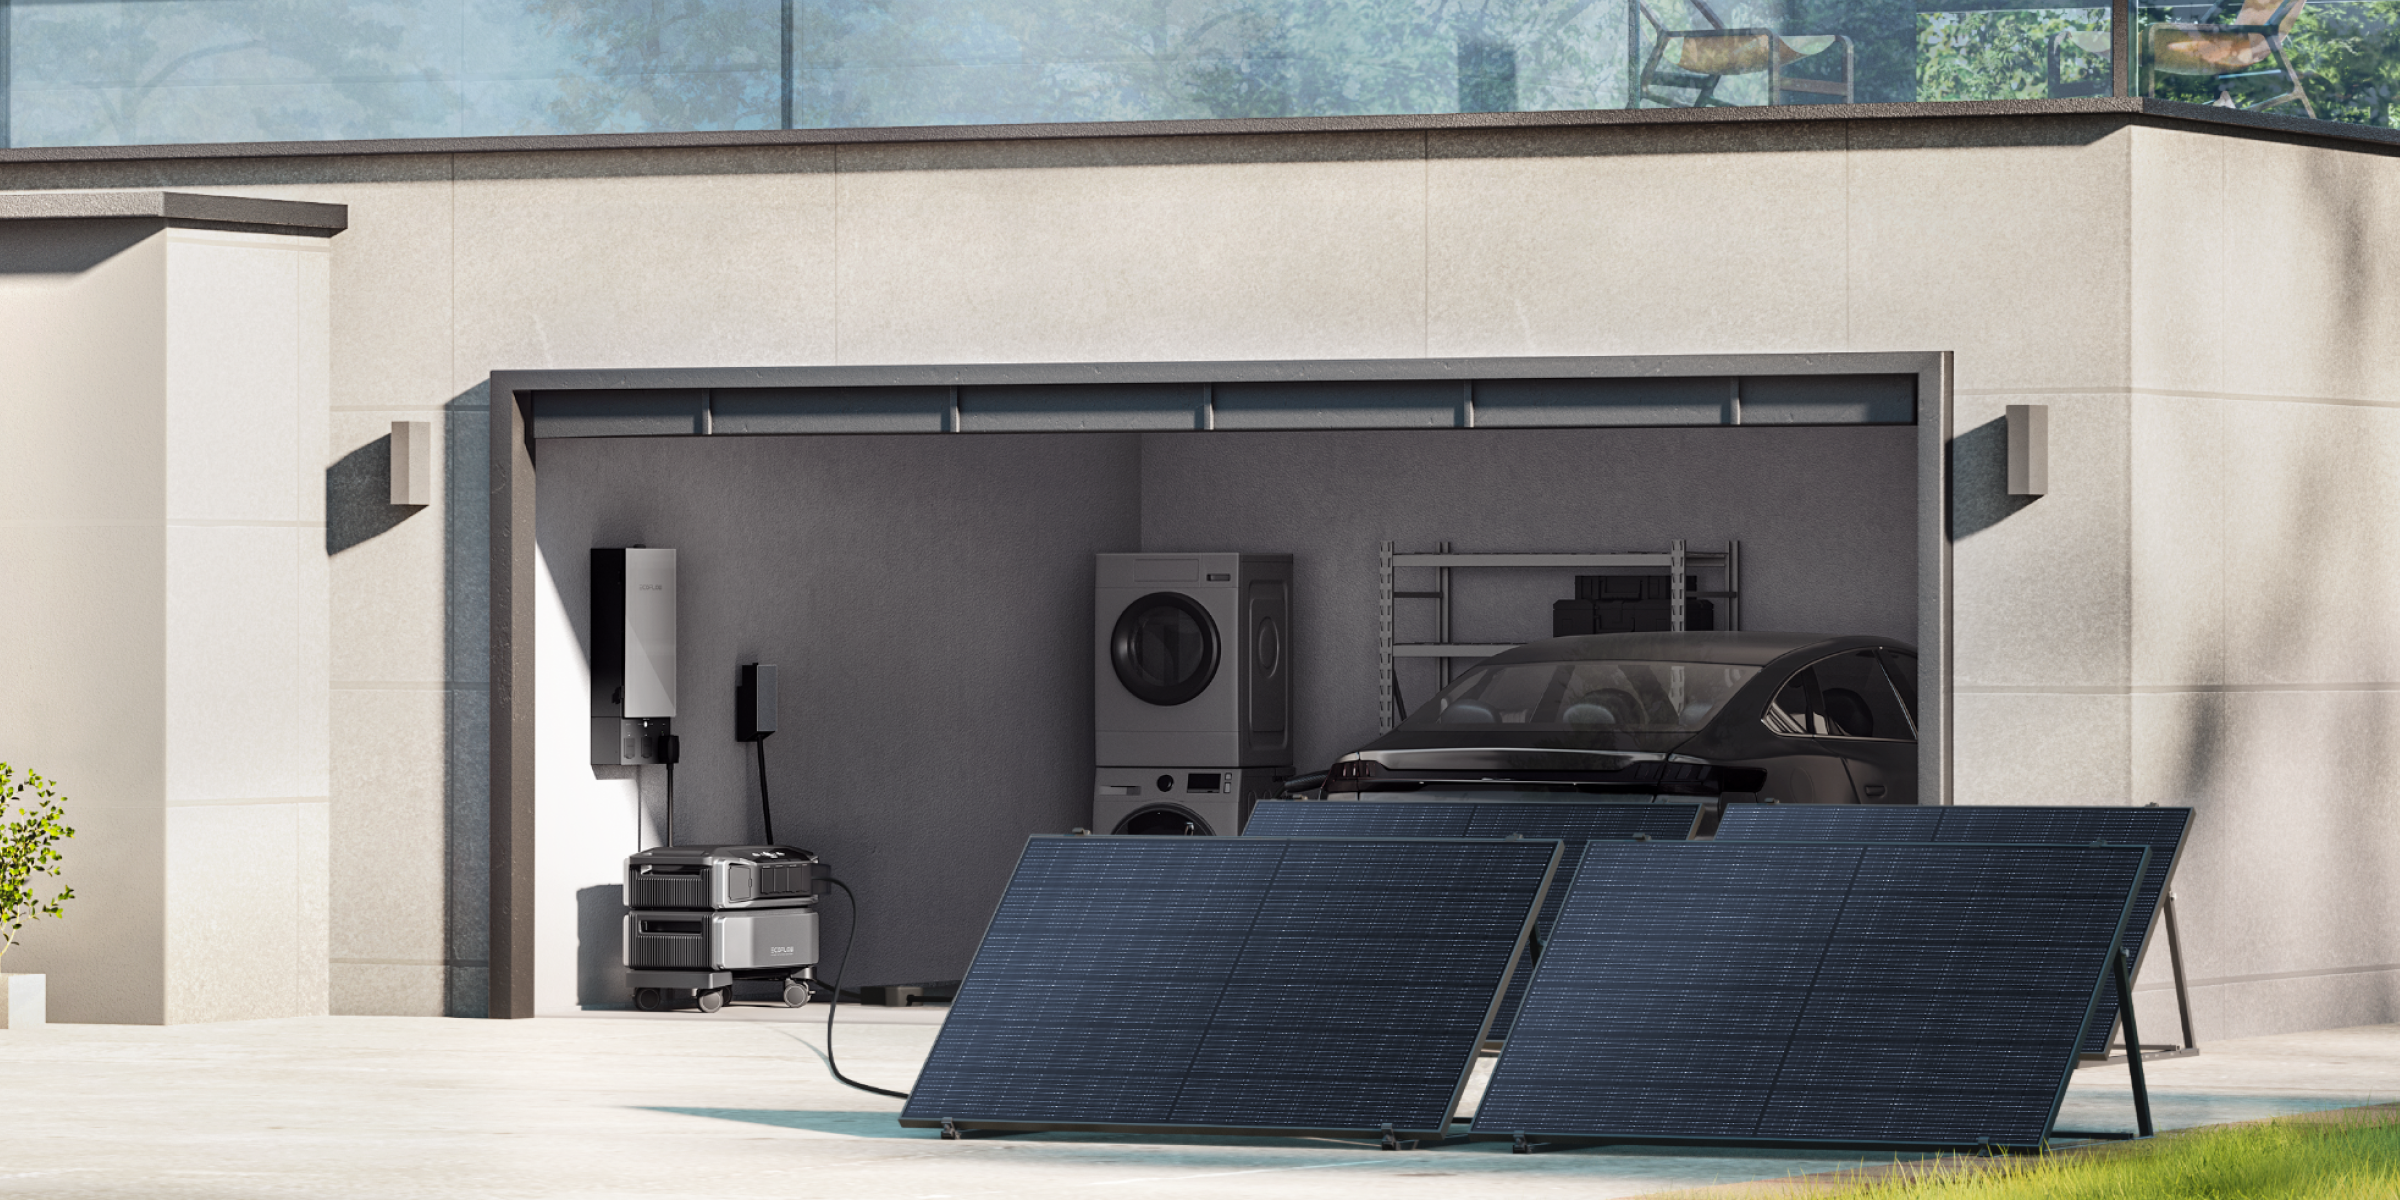 Four mounted solar panels absorb sunlight and transfer energy to an EcoFlow DELTA Pro Ultra house generator inside a garage.